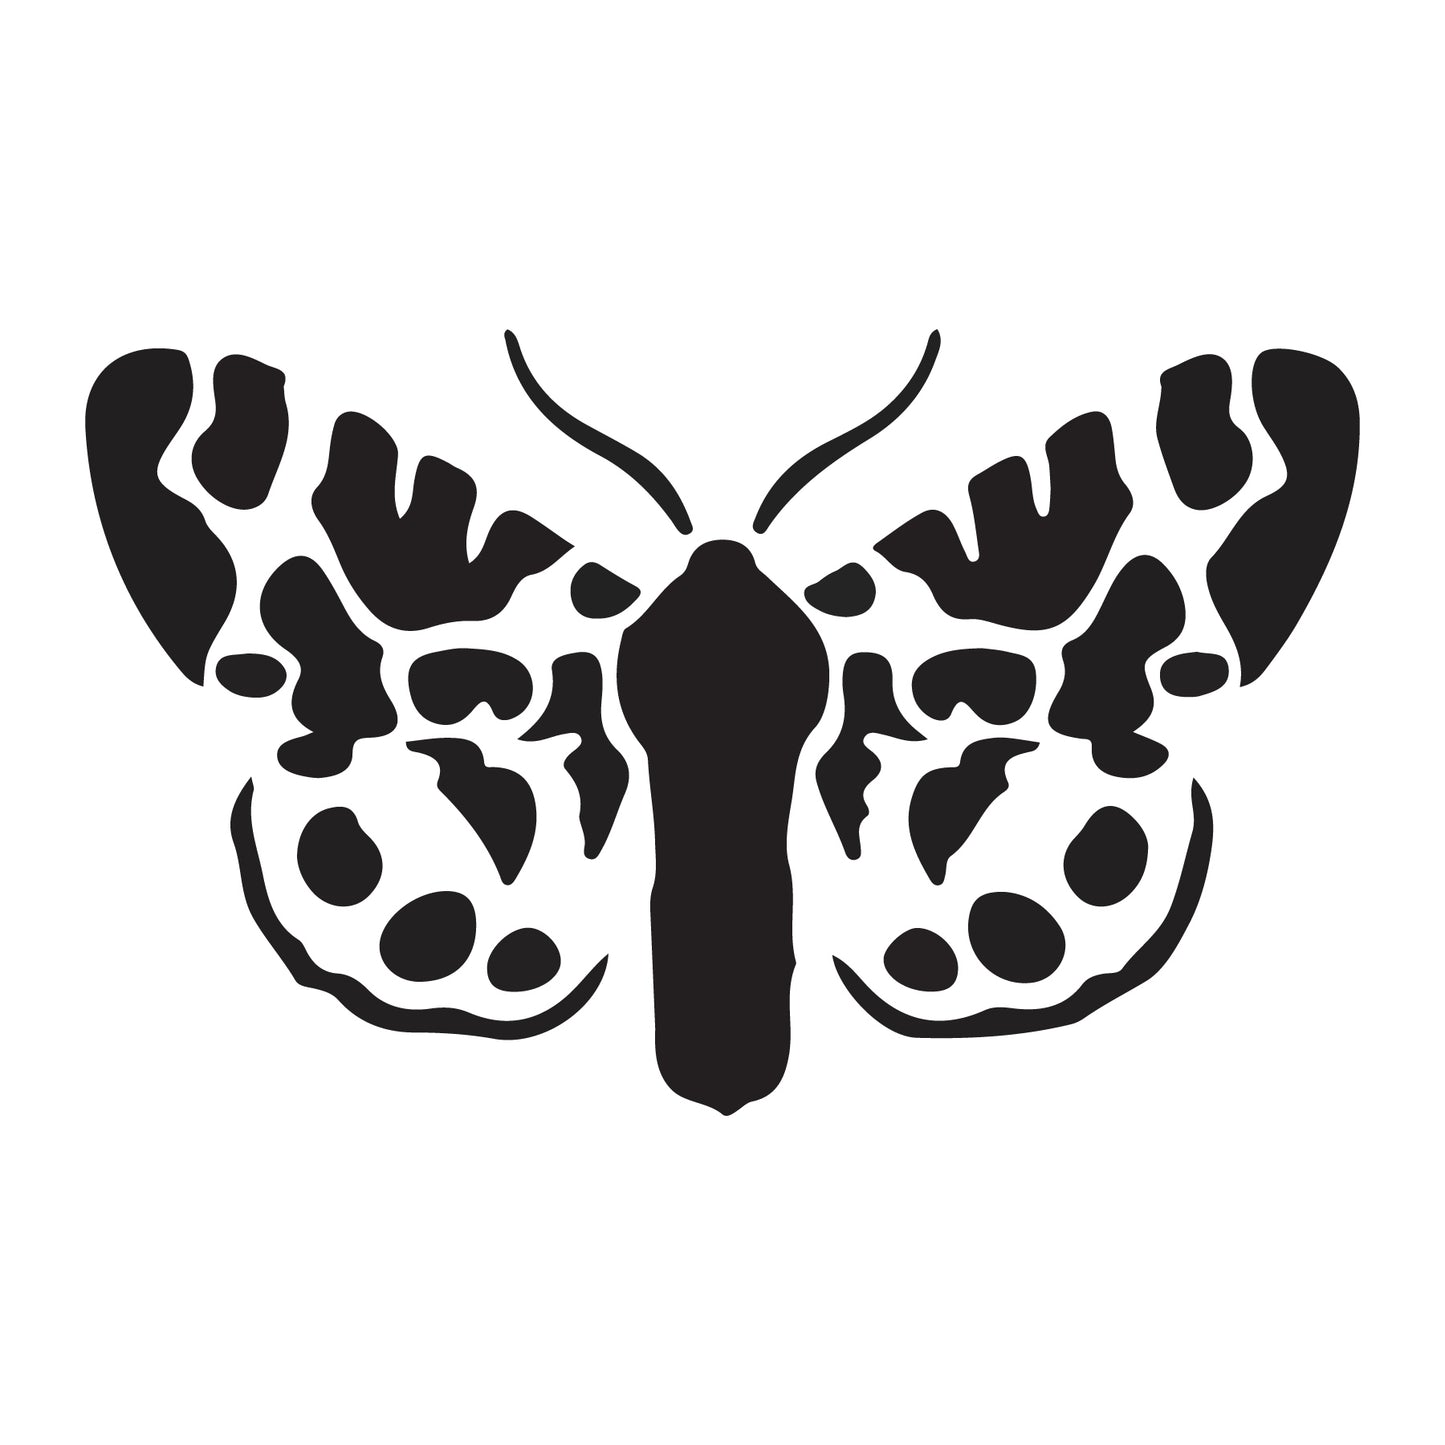 Wildlife Moth Design Stencil for Wall Painting (KDMD1505)